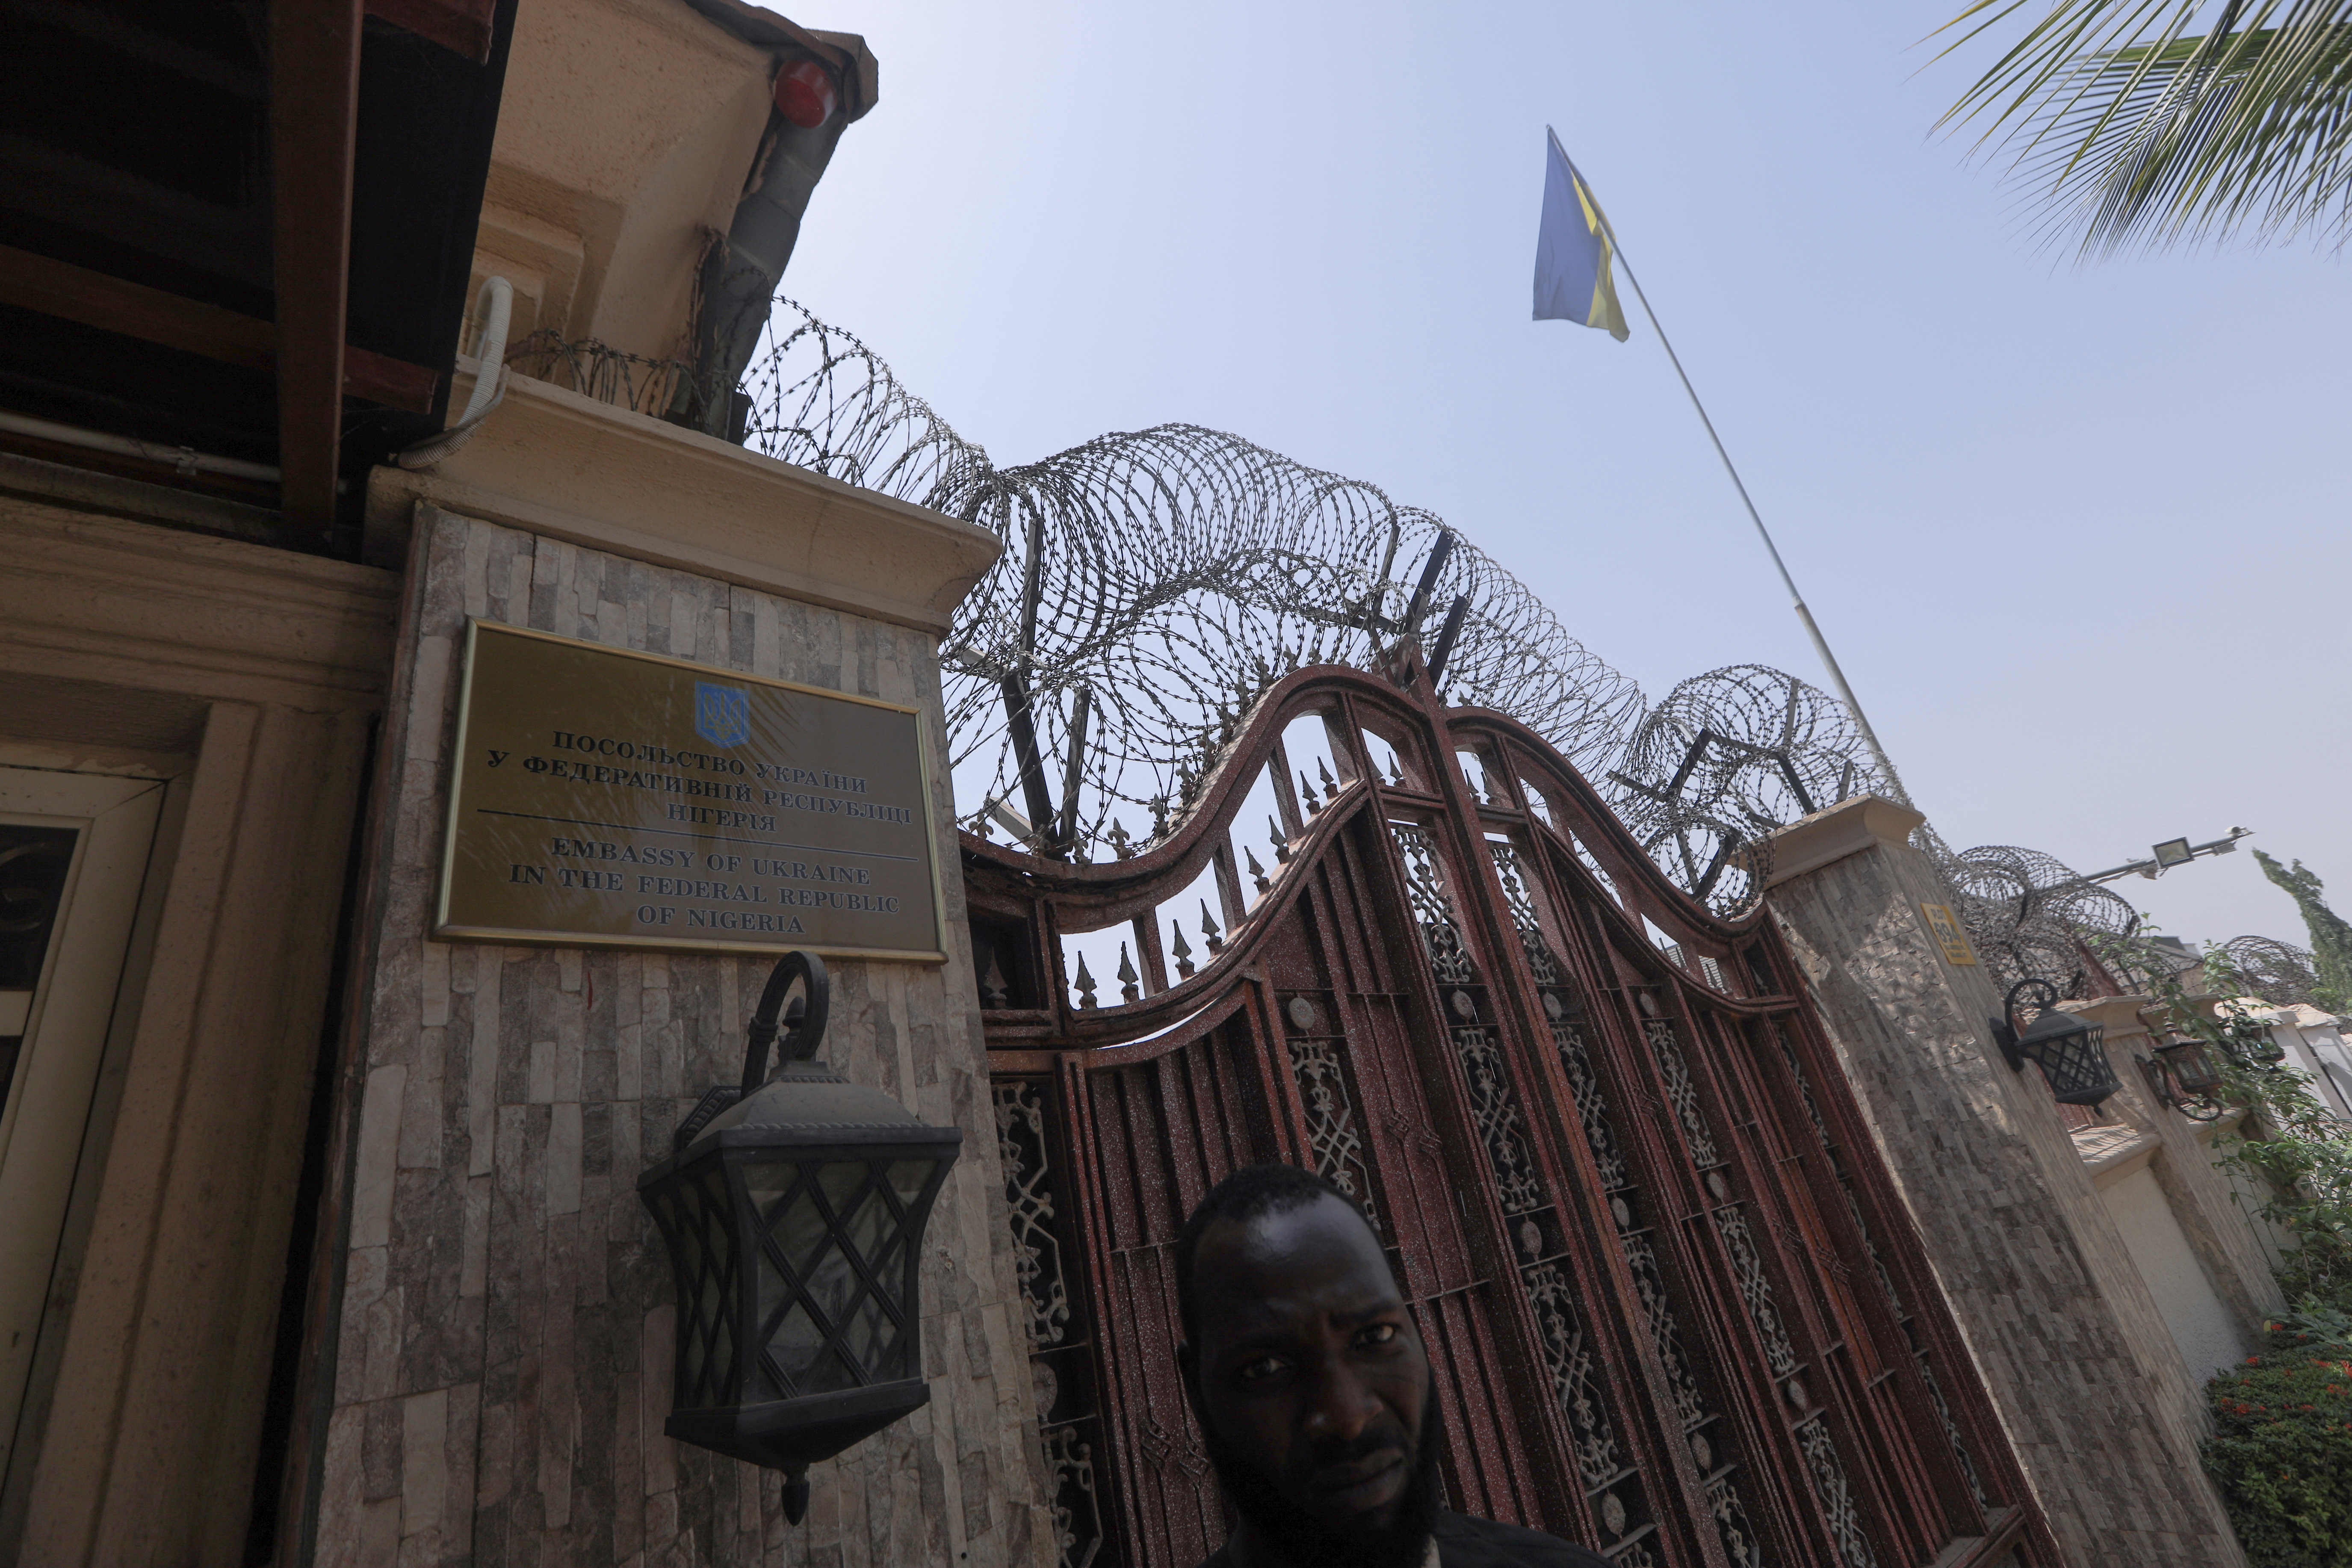 A Ukrainian flag is seen flying at the embassy in Abuja, Nigeria February 25, 2022. REUTERS/ Afolabi Sotunde